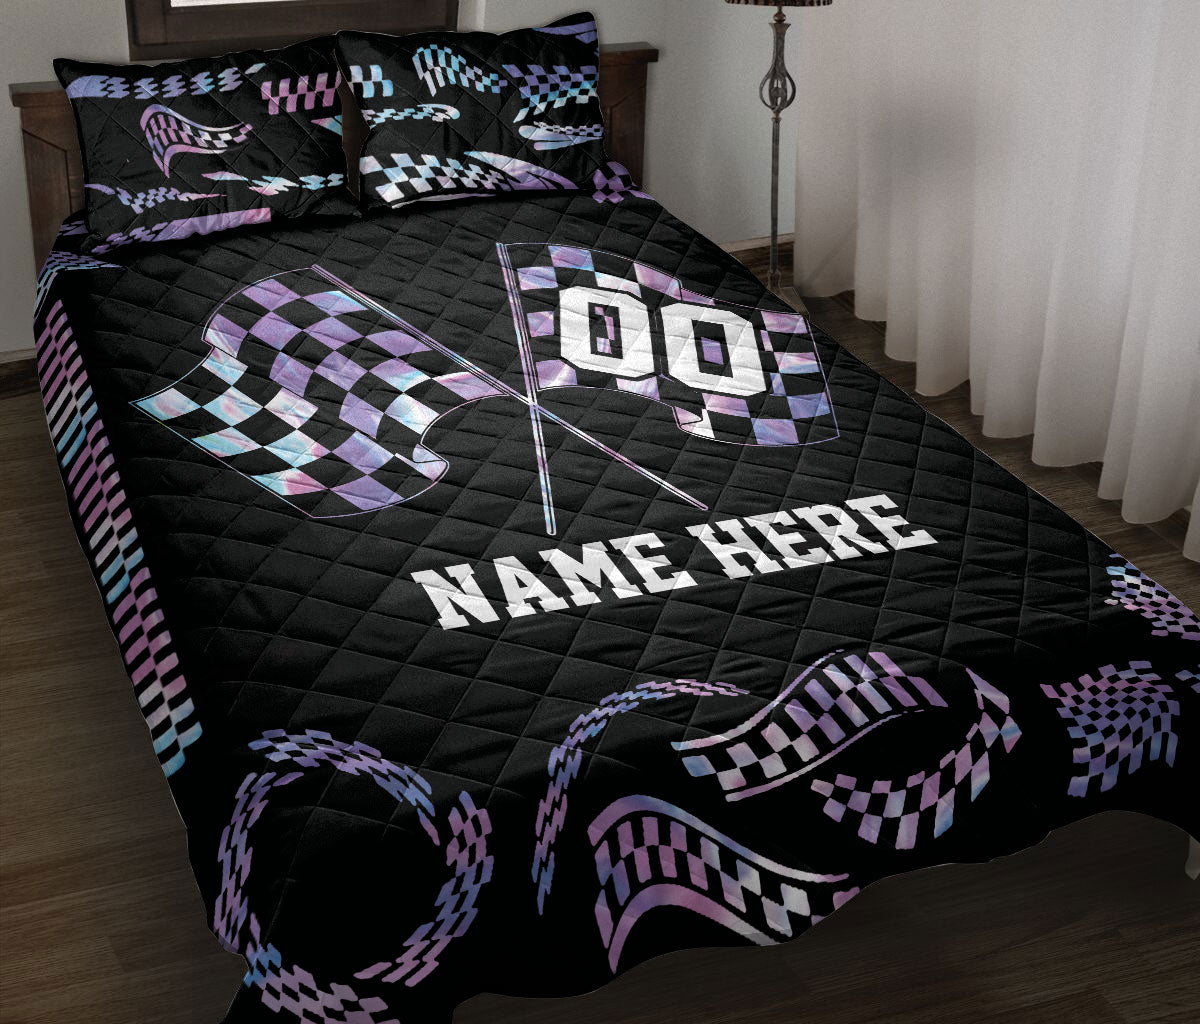 Ohaprints-Quilt-Bed-Set-Pillowcase-Racing-Racer-Checkered-Pattern-Unique-Gift-Custom-Personalized-Name-Number-Blanket-Bedspread-Bedding-743-Throw (55'' x 60'')